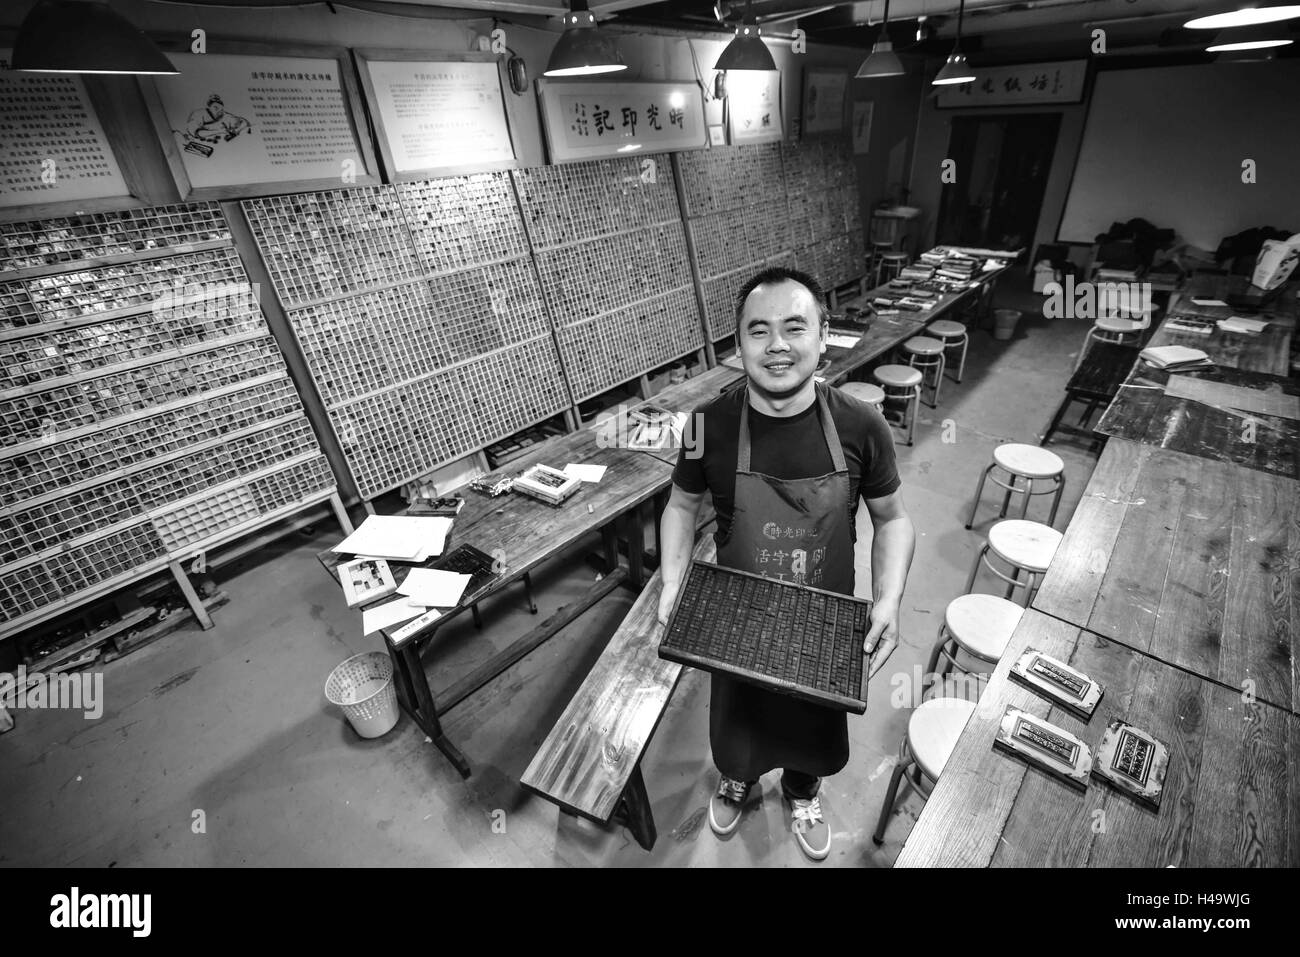 Qingdao, Qingdao, China. 14th Oct, 2016. Binzhou, CHINA-October 13 2016: (EDITORIAL USE ONLY.CHINA OUT) Ruan Tongmin works in his studio of movable type printing in Qingdao, east China's Shandong Province, October 14th, 2016. Ruan Tongmin, born in a family of printing, is fond of studying on the industry of printing. He has collected hundreds of various printing machines and established a studio specializing on movable type printing, aiming to revitalize Chinese traditional culture of movable type printing. Movable type is the system and technology of printing and typography that uses movab Stock Photo